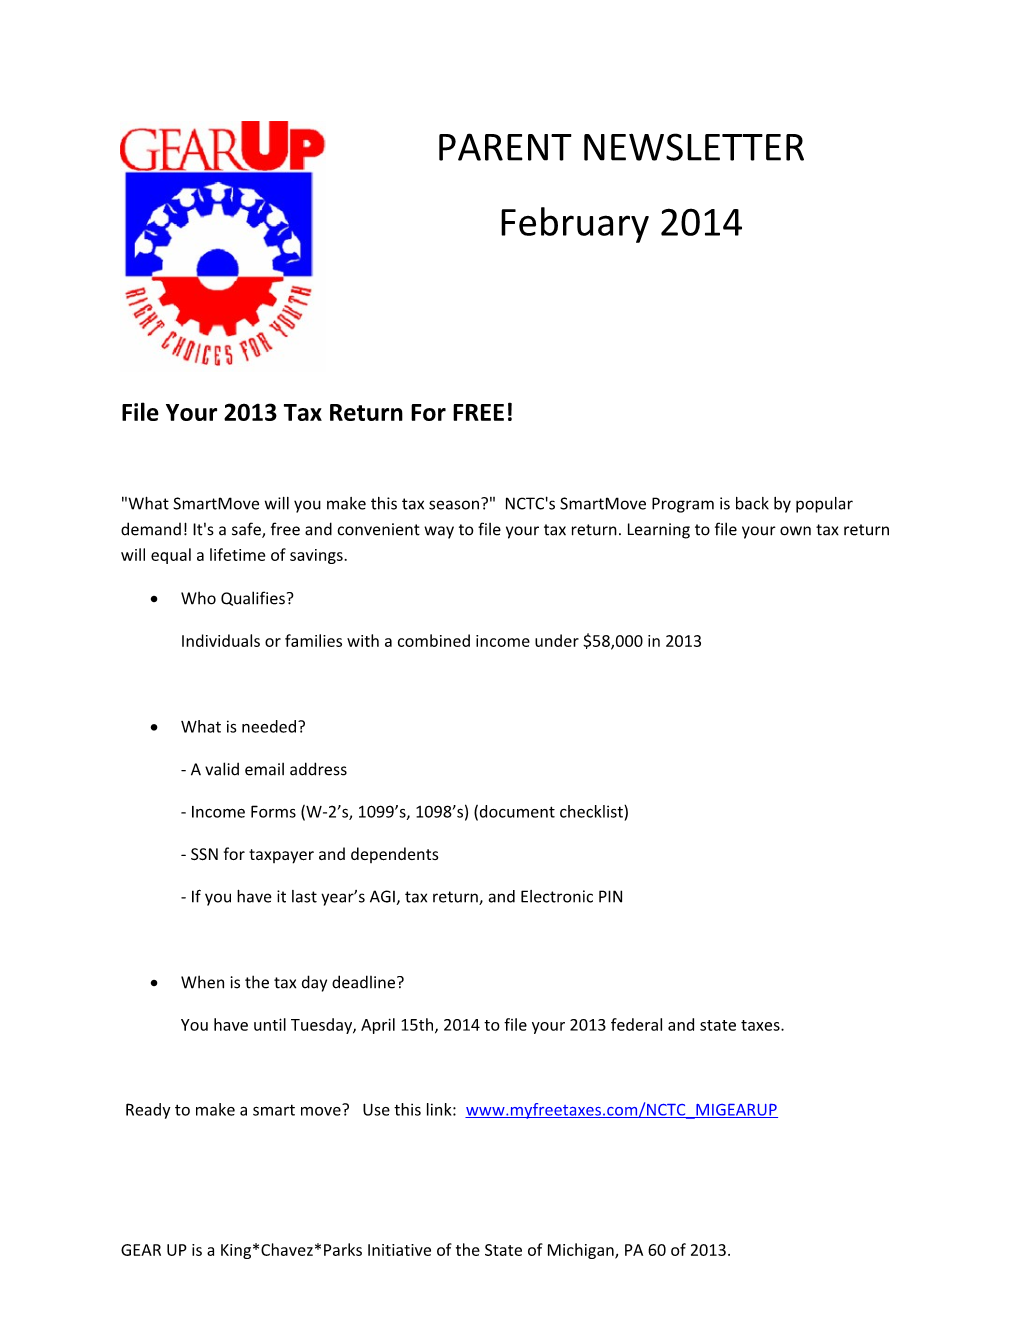 File Your 2013 Tax Return for FREE!